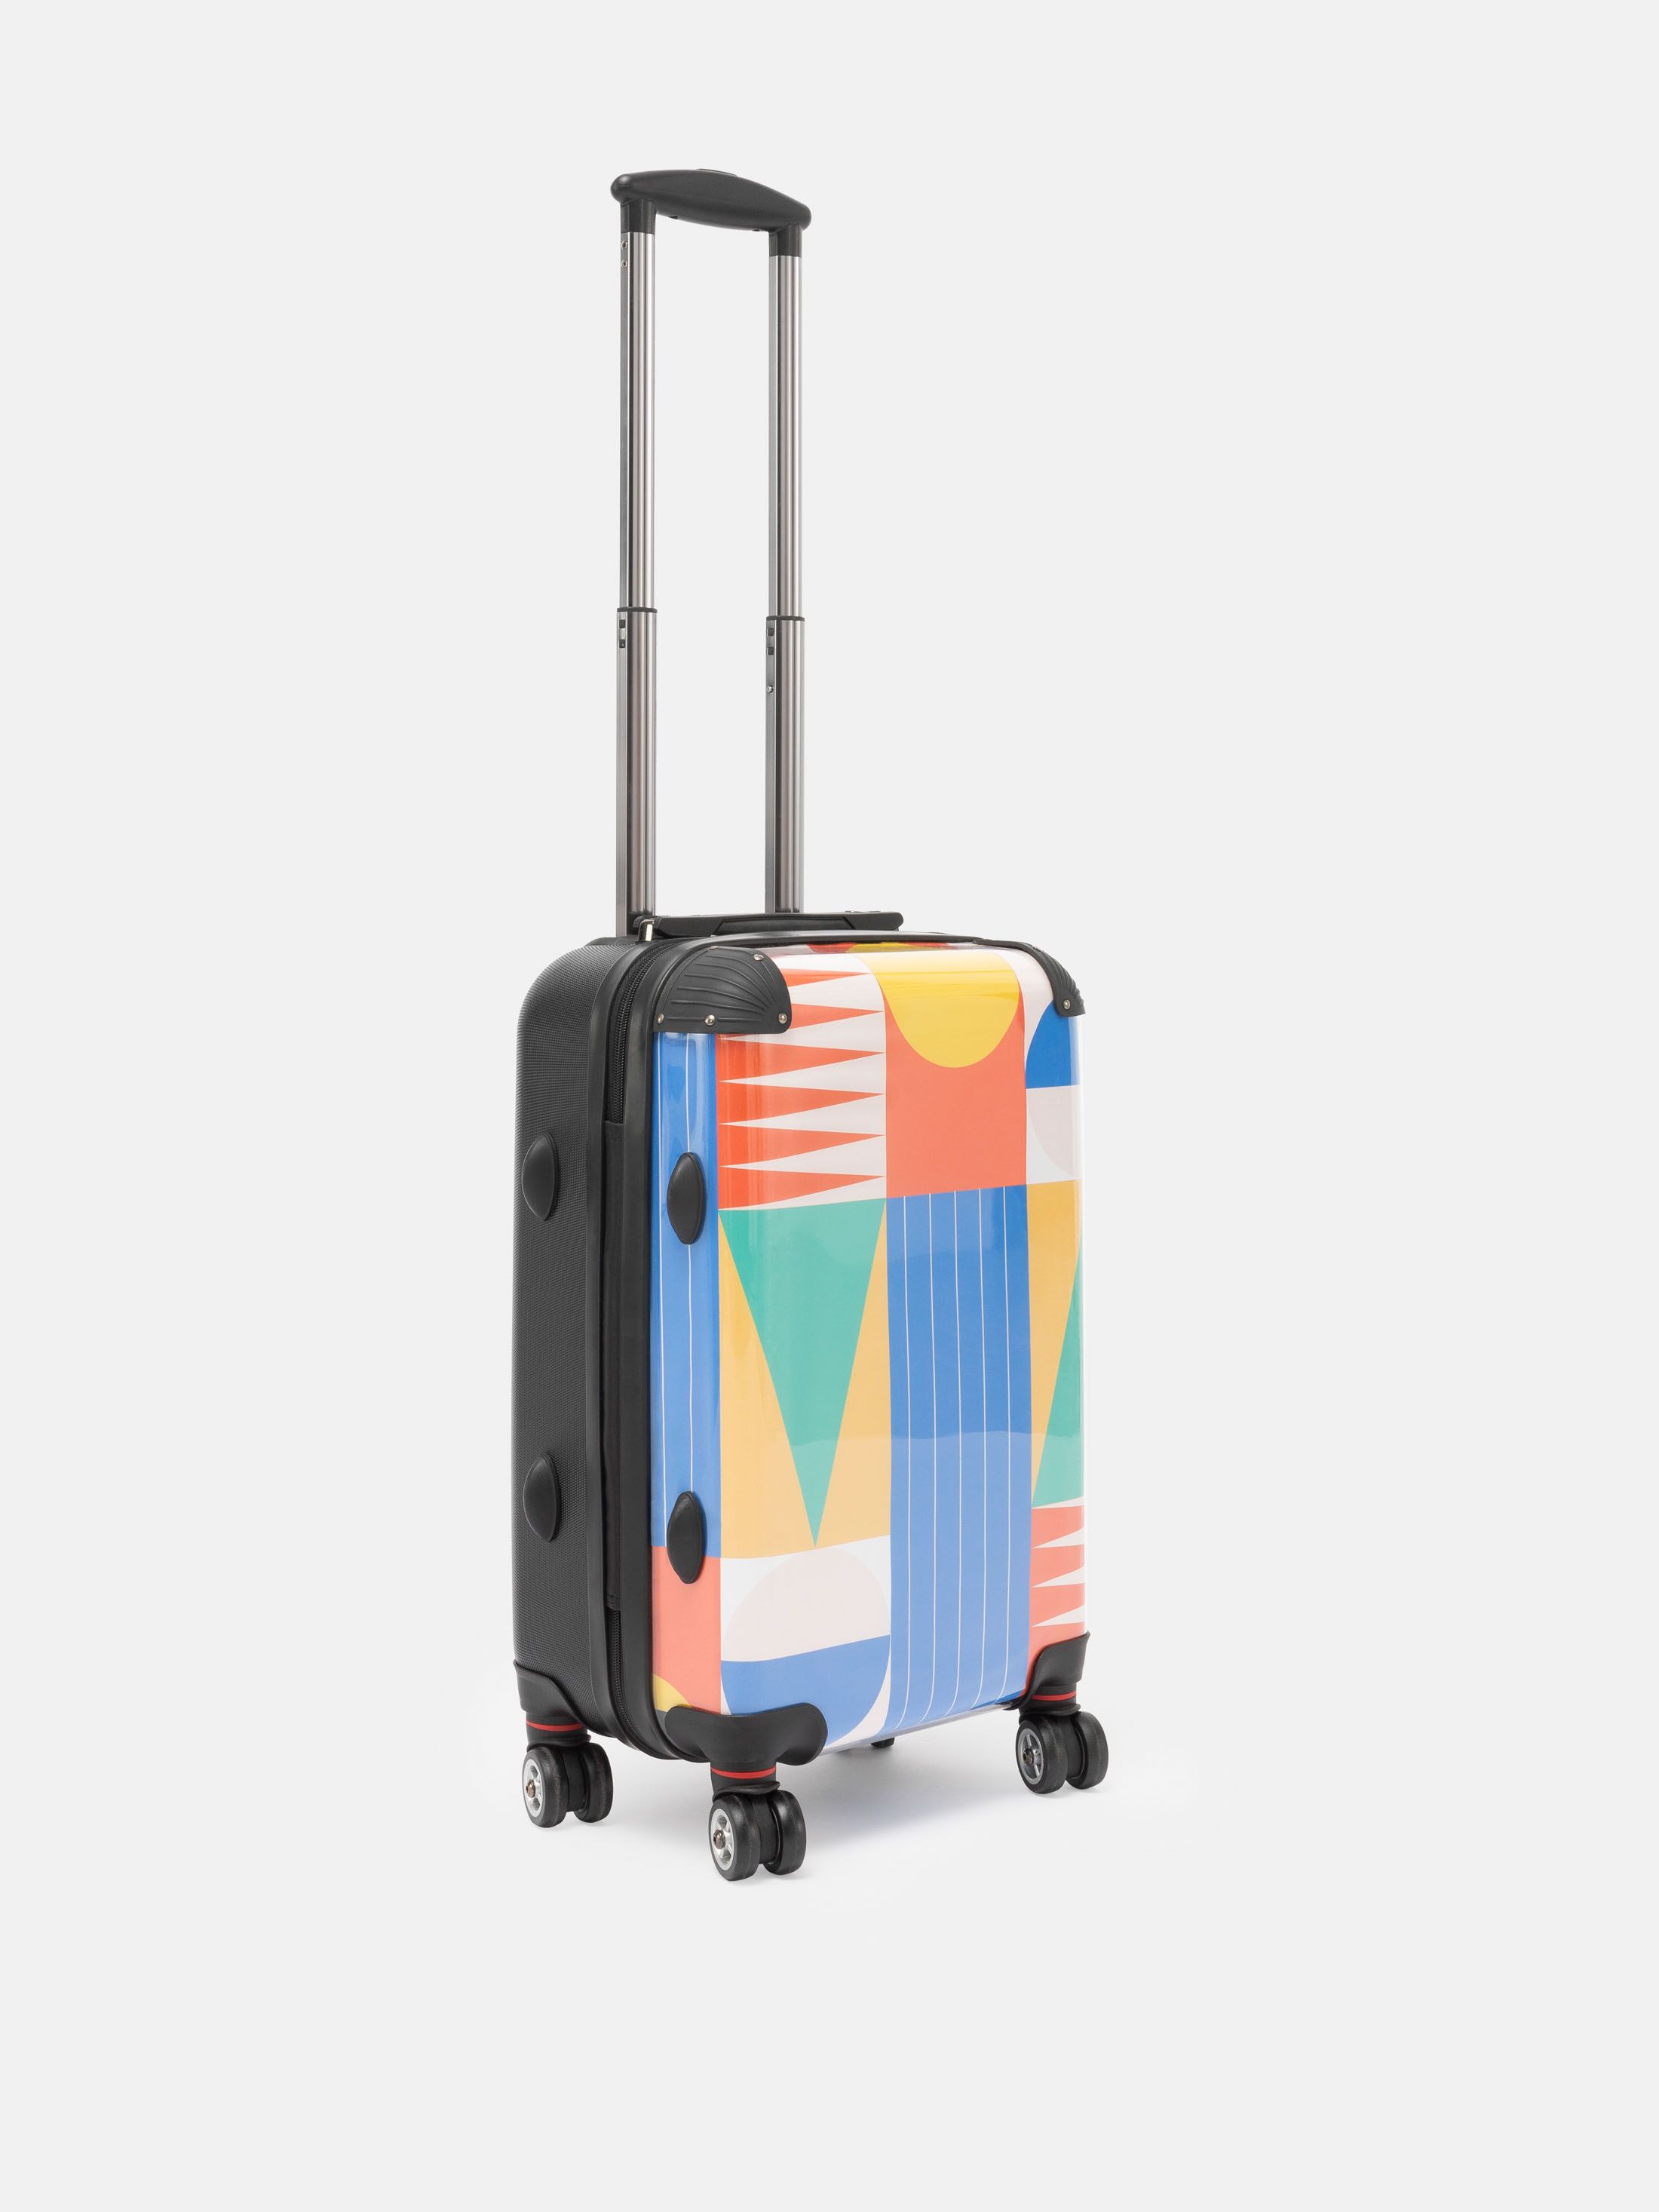 design your own suitcase